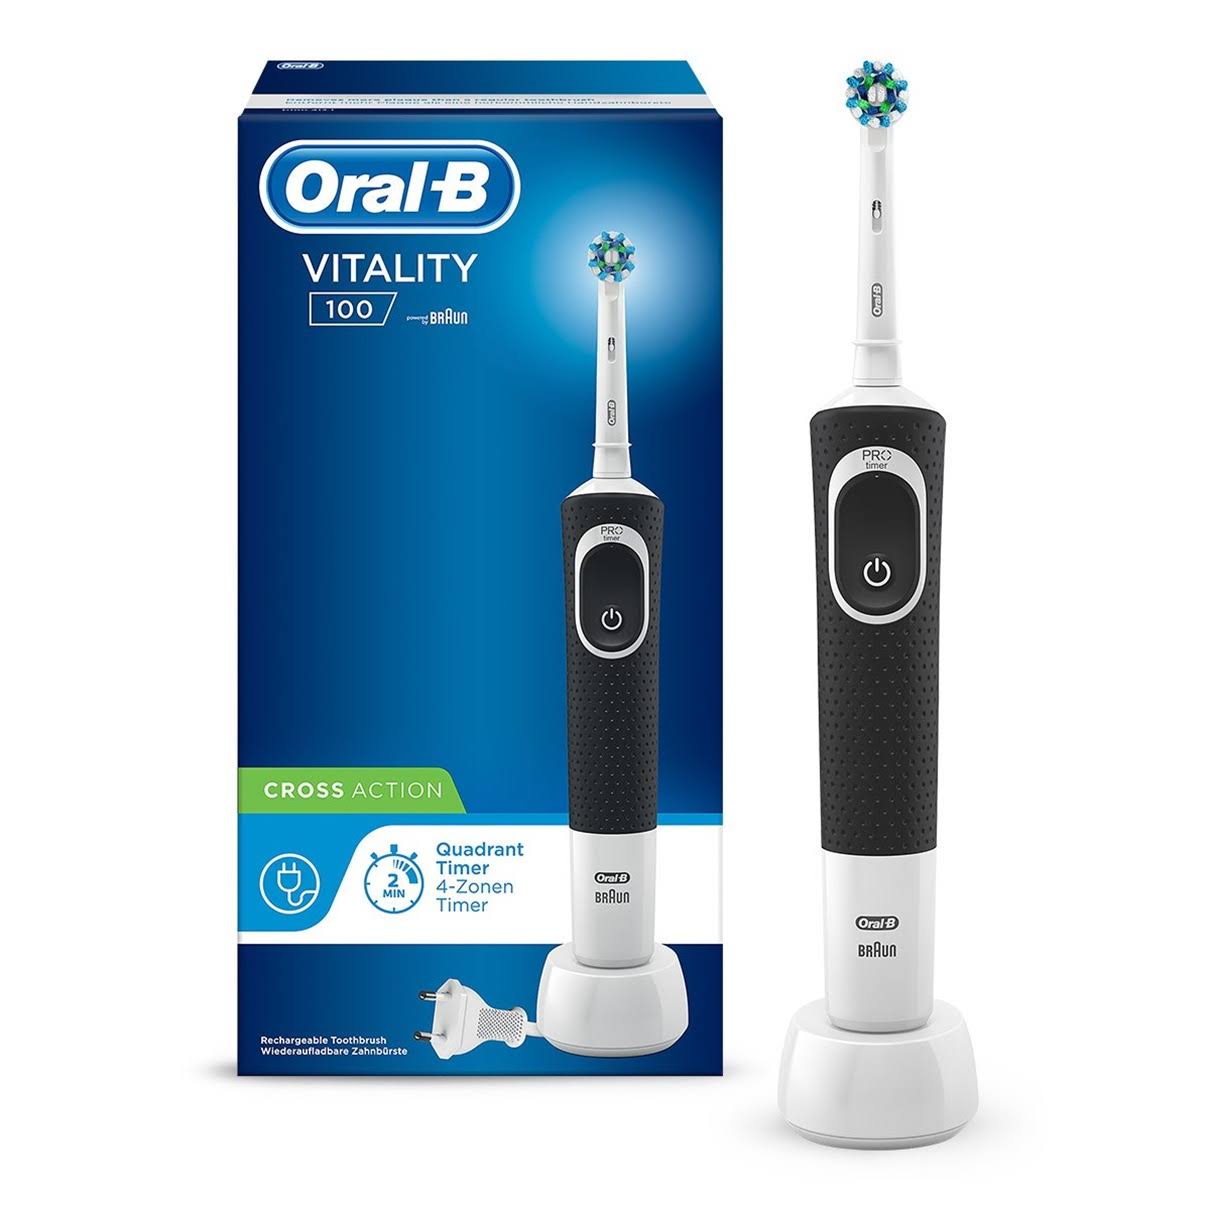 Oral B Vitality 100 Cross Action Electric Toothbrush Black